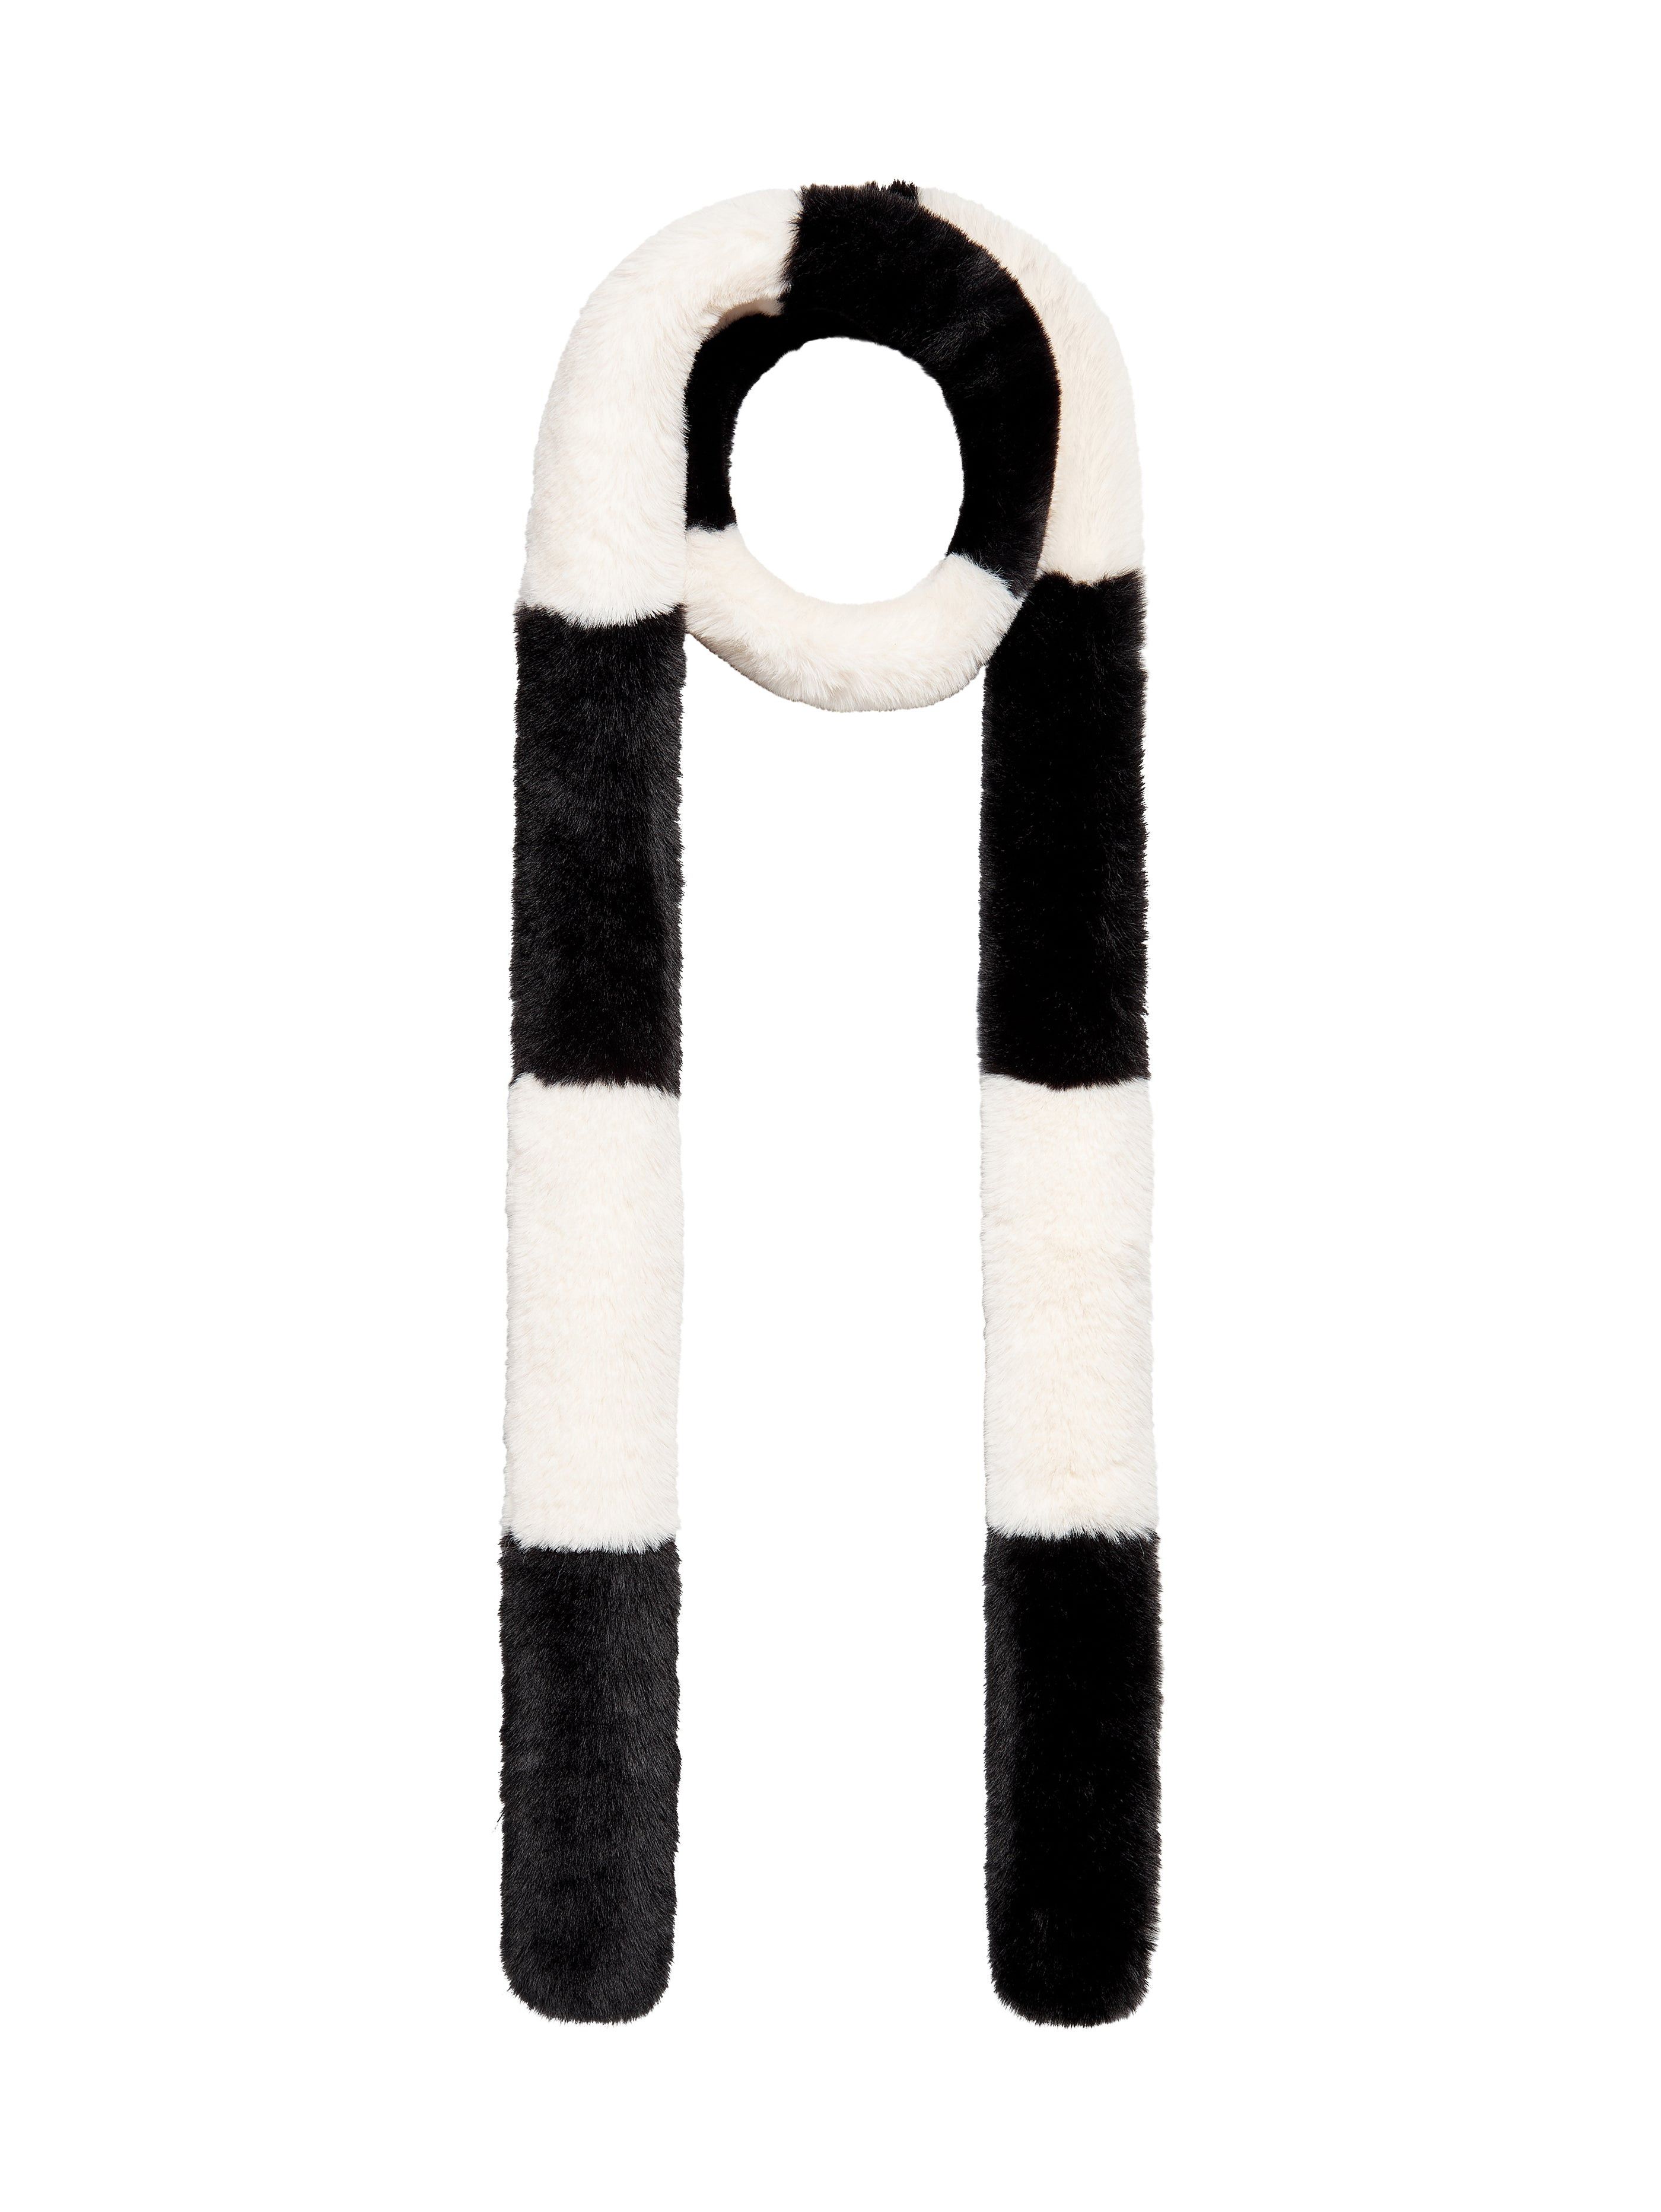 Stripey Faux Fur Scarf-Black And White | Wolf & Badger (US)